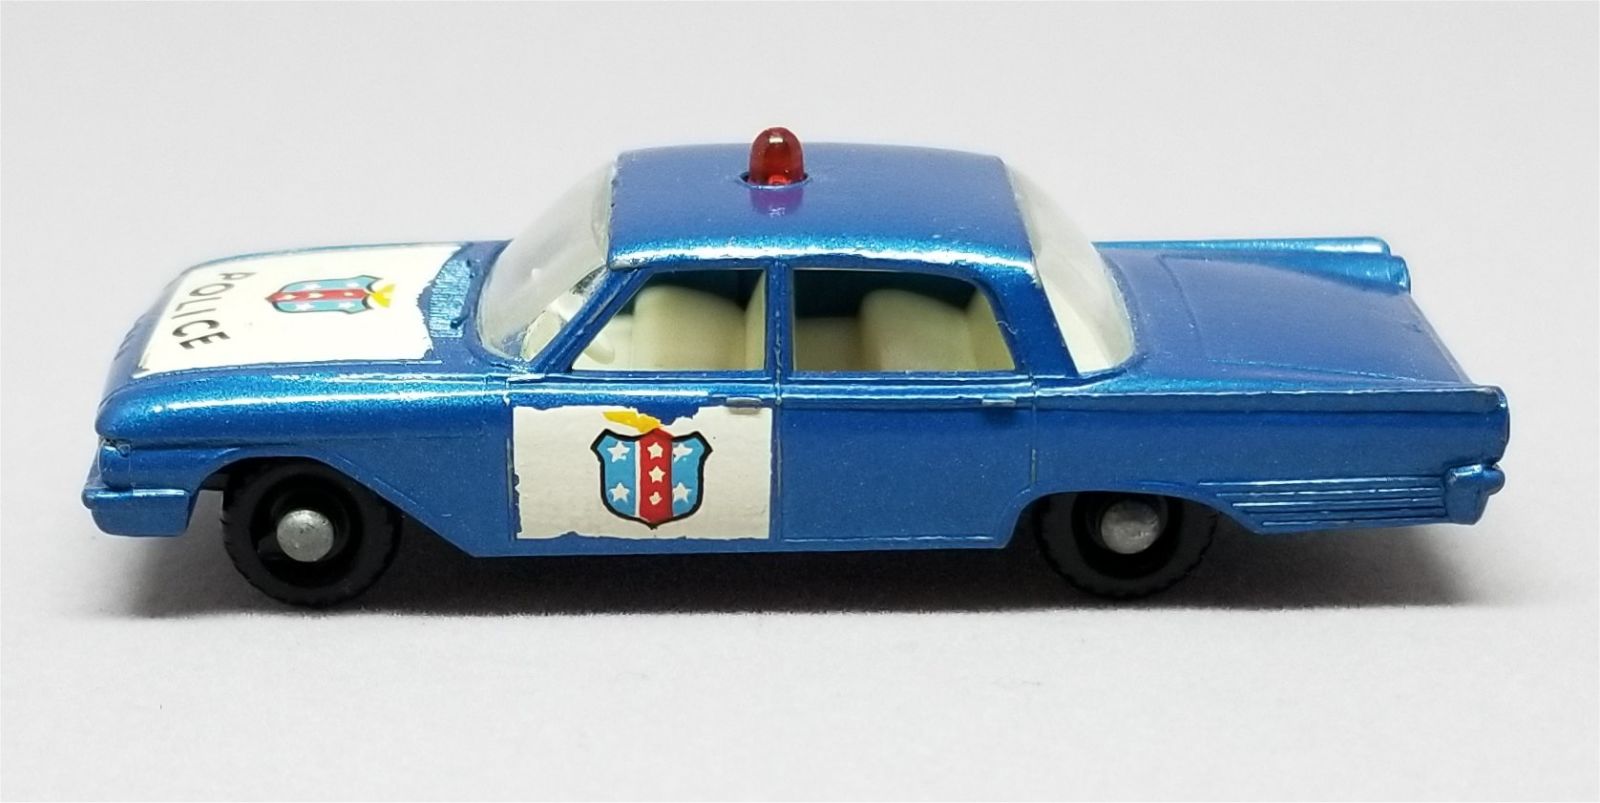 Illustration for article titled [REVIEW] Lesney Matchbox Ford Fairlane Police Car